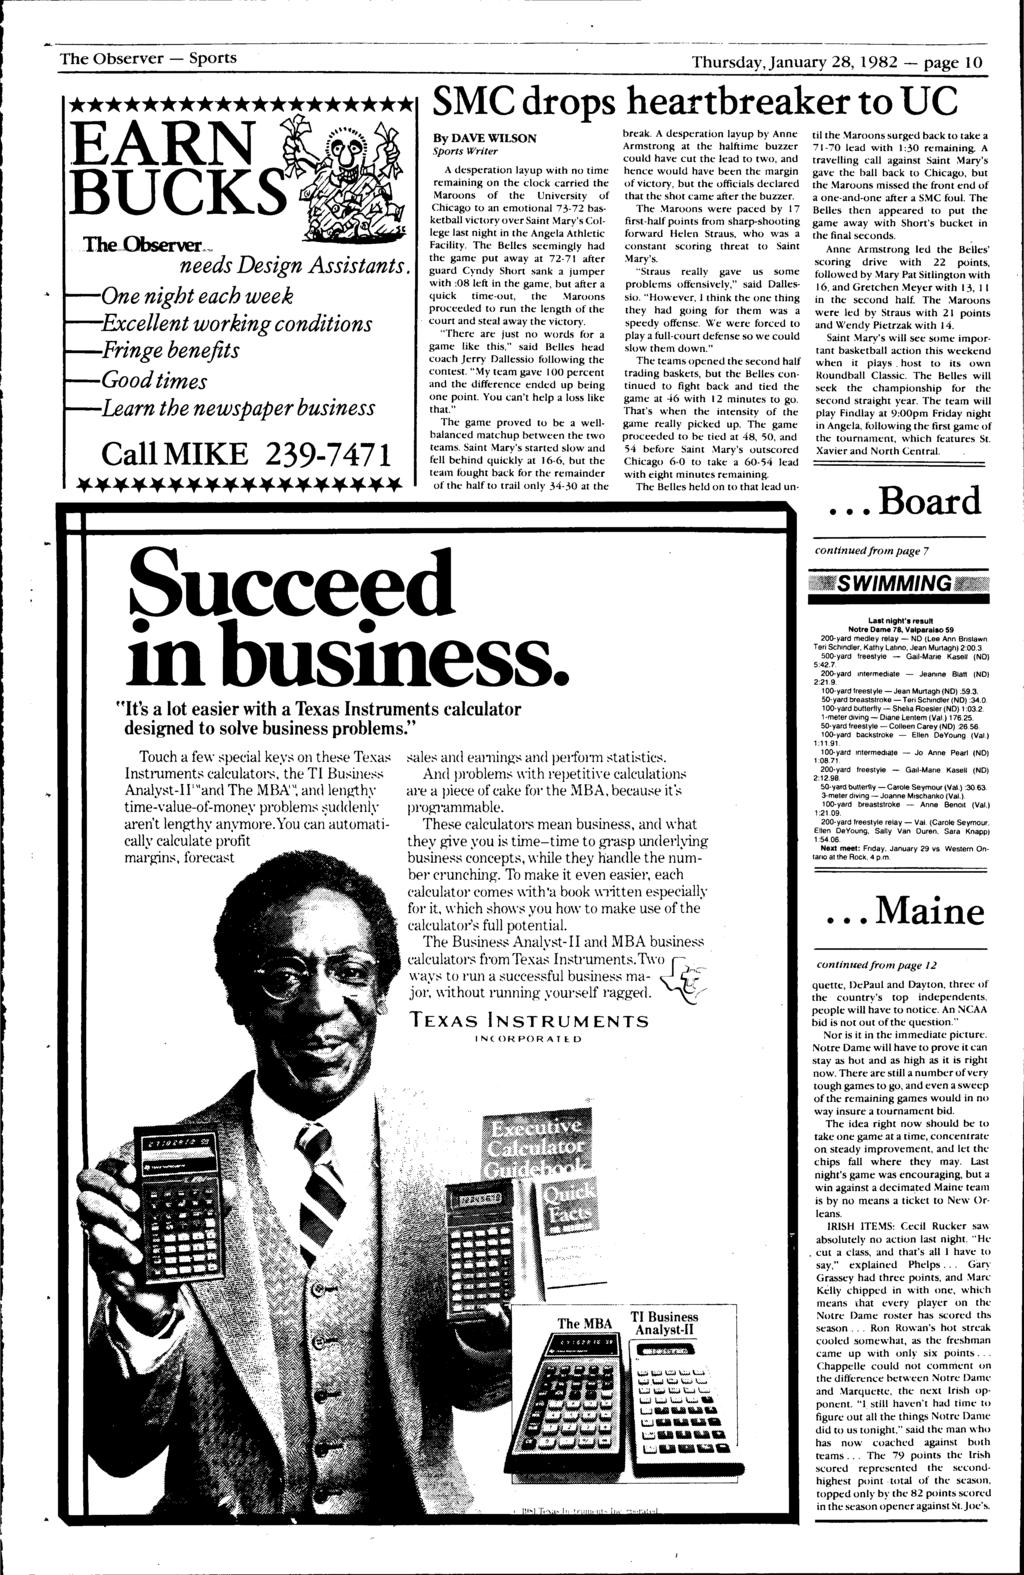 ... -------------- The Observer - Sports Thursday, january 28, 1982 - page 10 ******************* EARN ~~l BUCKS / Thenbserver~~ needs Design Assistants...., One night each weele..,._-excellent working conditions.